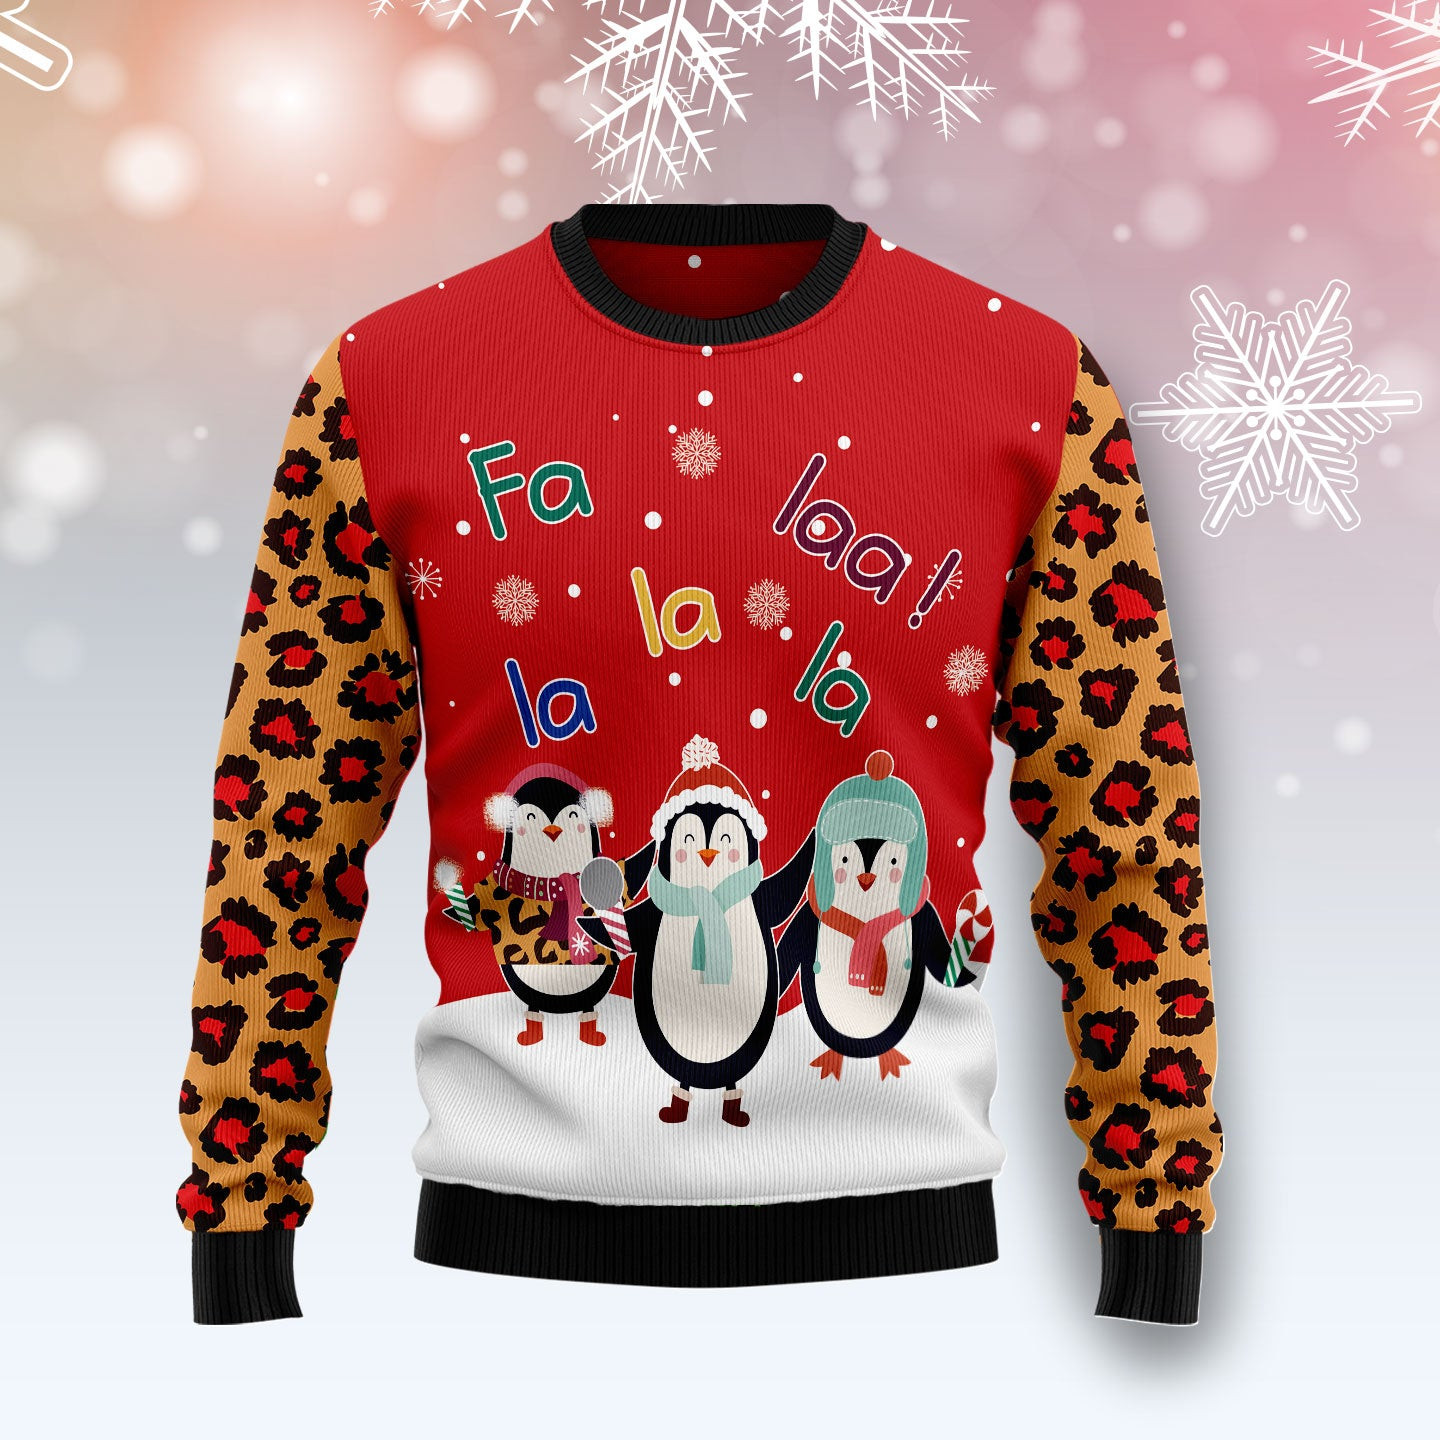 Penguin Christmas Song Ugly Christmas Sweater, Ugly Sweater For Men Women, Holiday Sweater